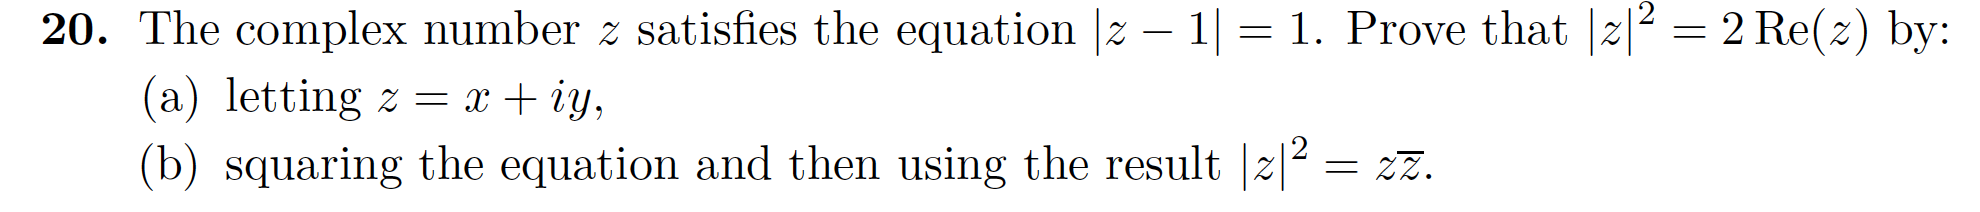 1. Prove that |z2 =
1
2 Re(z) by:
20. The complex number z satisfies the equation |z
(a) letting z = x + iy,
(b) squaring the equation and then using the result z2= zz.
